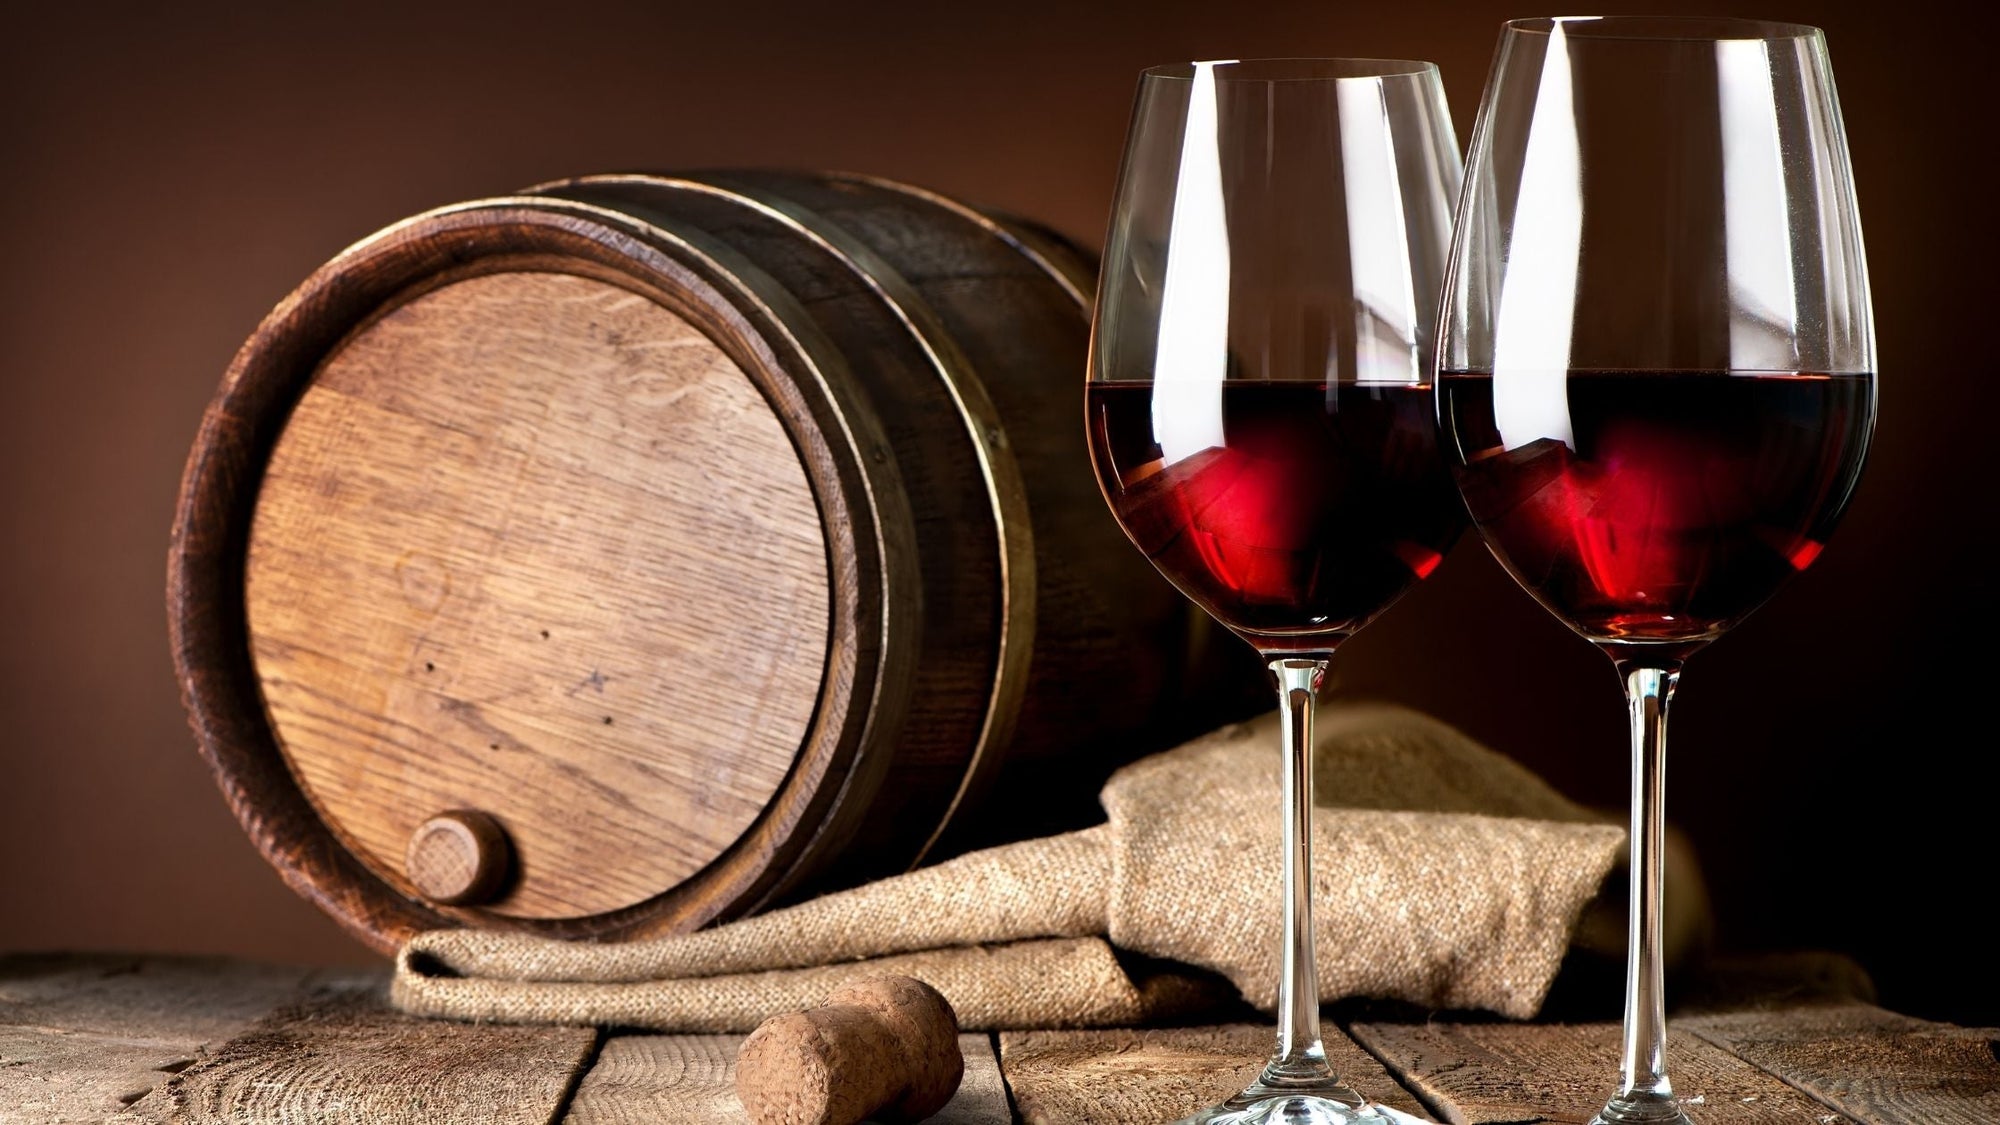 4 Wine Barrel Storage Ideas - And Why You Need Them For Your Wine Collection | Wine Stash